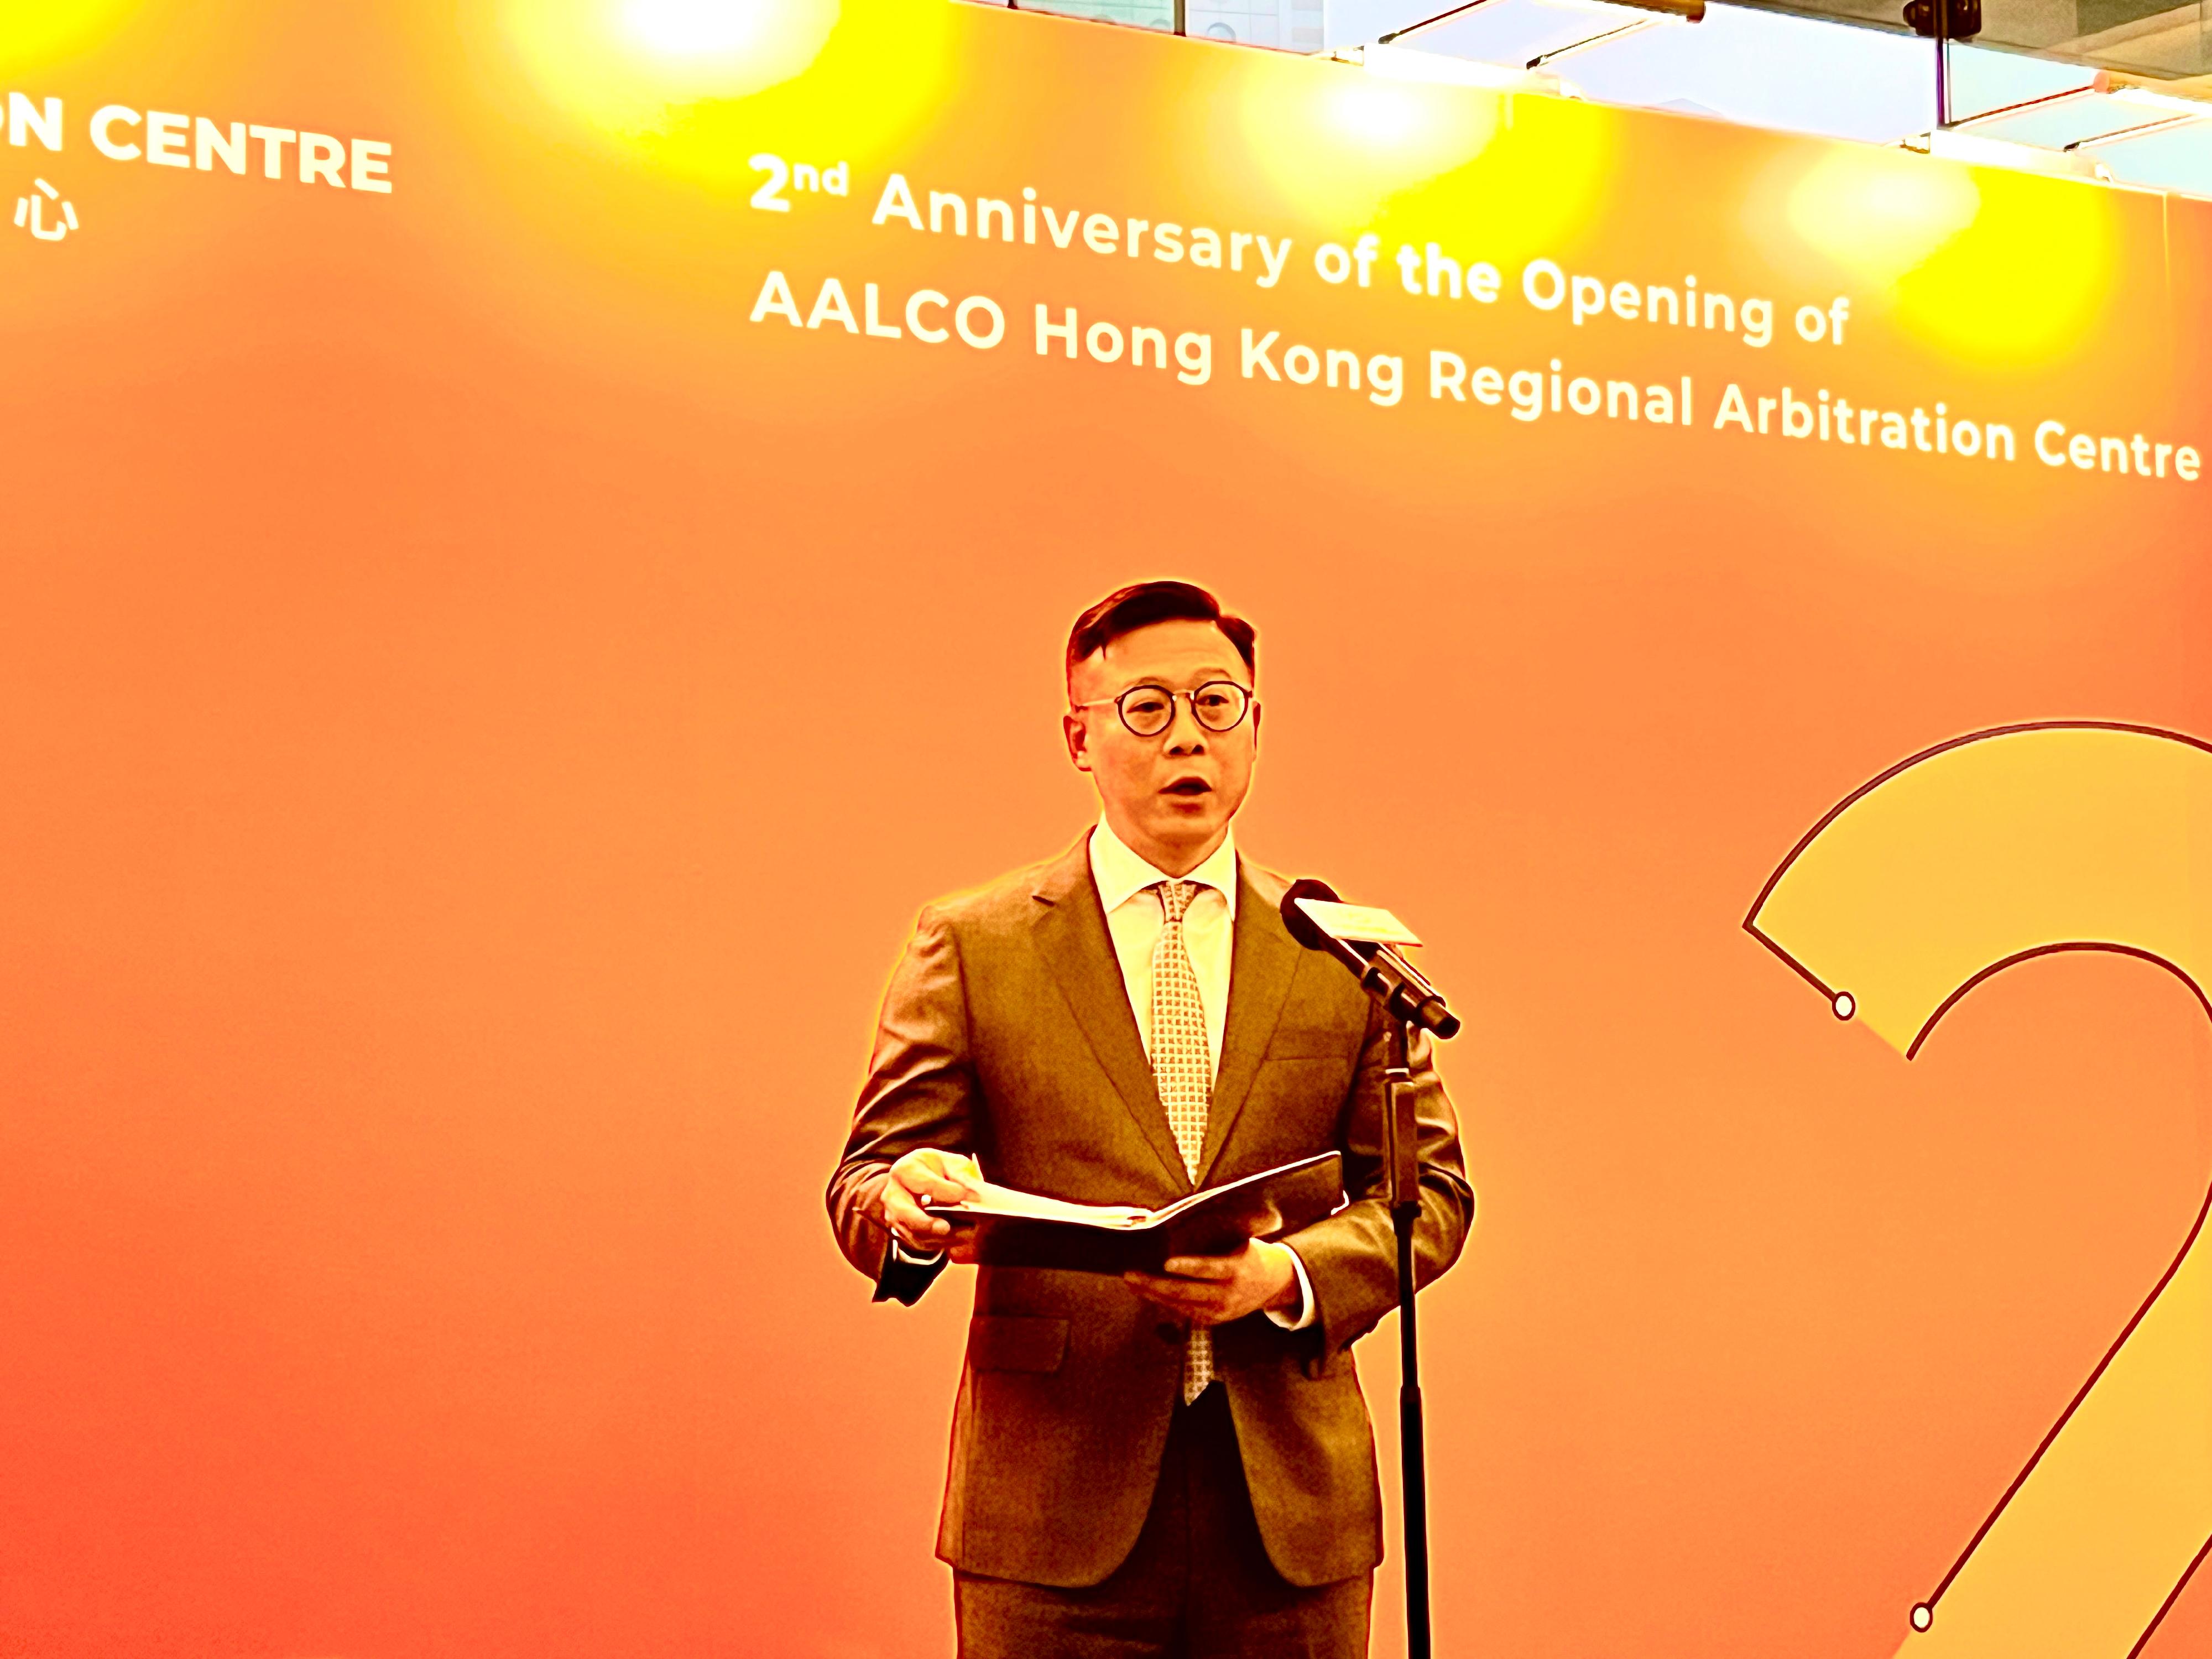 The Deputy Secretary for Justice, Mr Cheung Kwok-kwan, speaks at the 2nd Anniversary of the Opening of AALCO (Asian-African Legal Consultative Organization) Hong Kong Regional Arbitration Centre today (June 5).